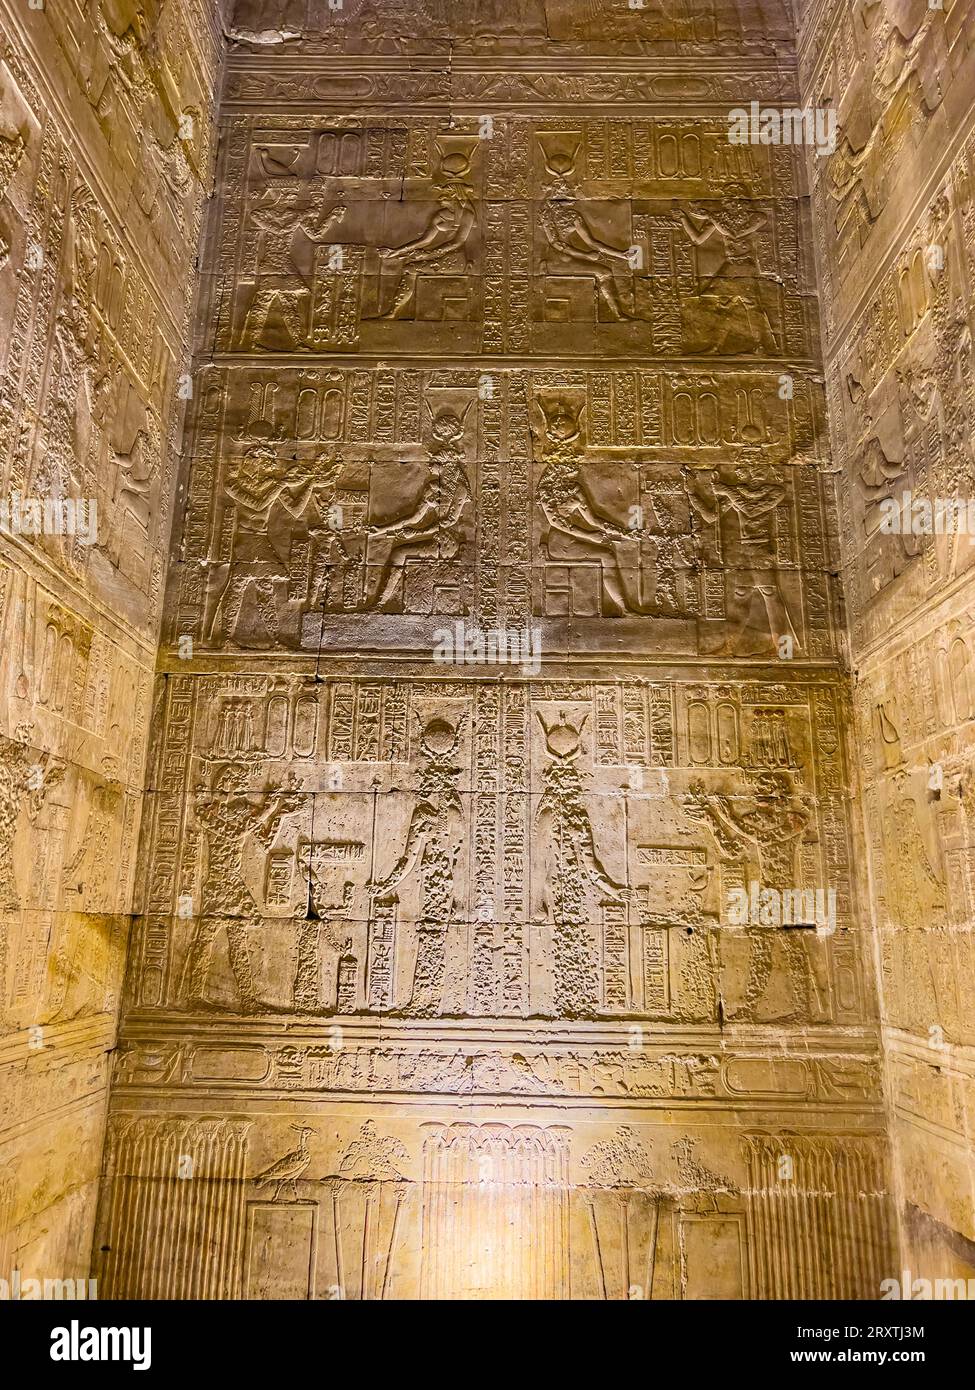 Interior view of the reliefs inside the Temple of Hathor, Dendera Temple complex, Dendera, Egypt, North Africa, Africa Stock Photo